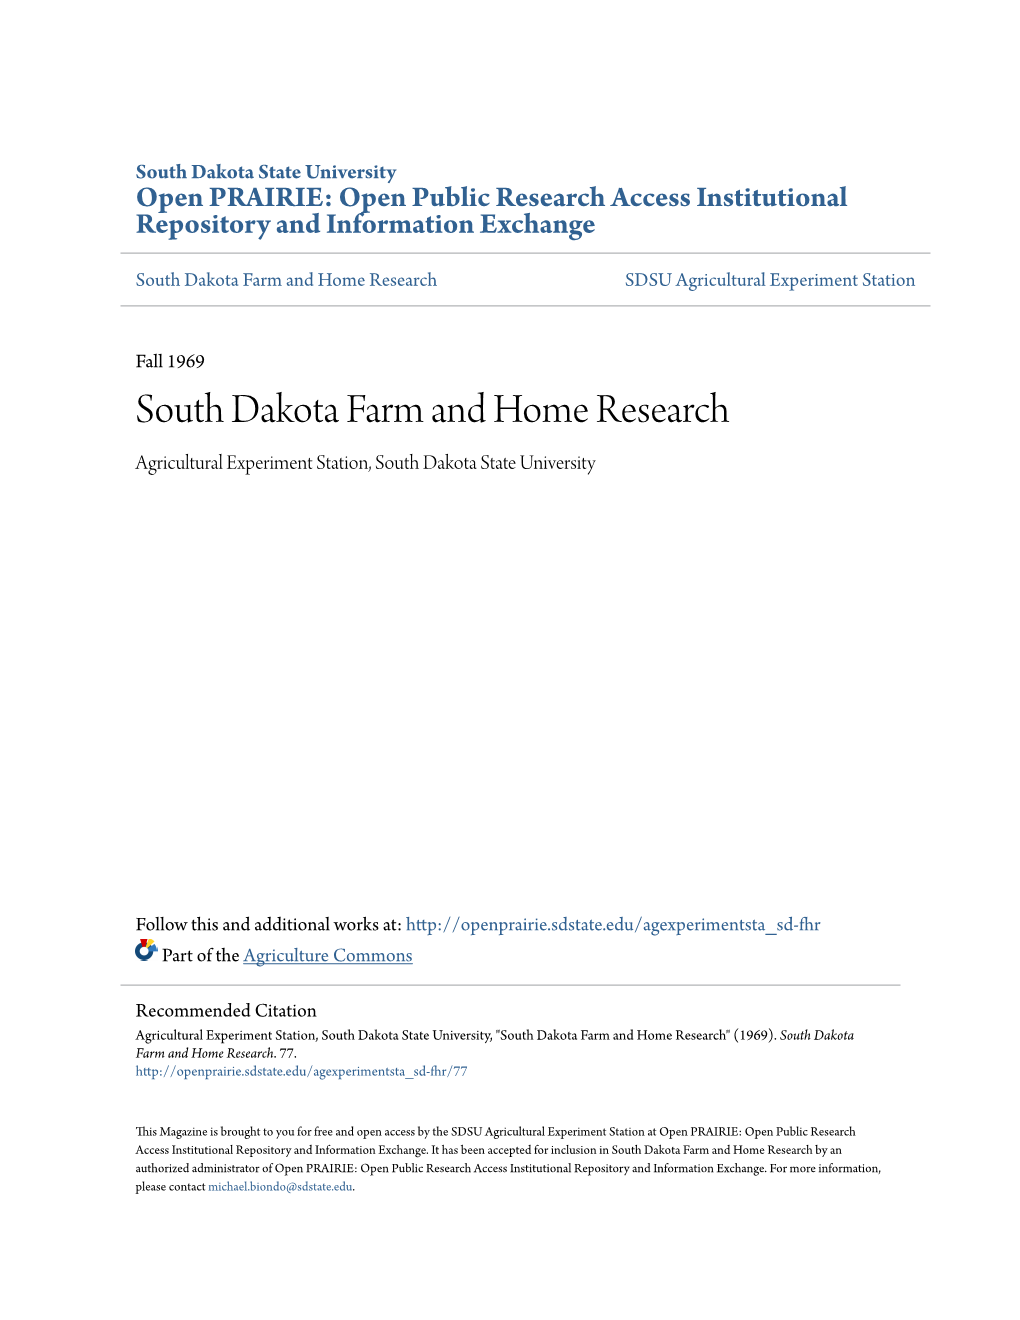 South Dakota Farm and Home Research SDSU Agricultural Experiment Station